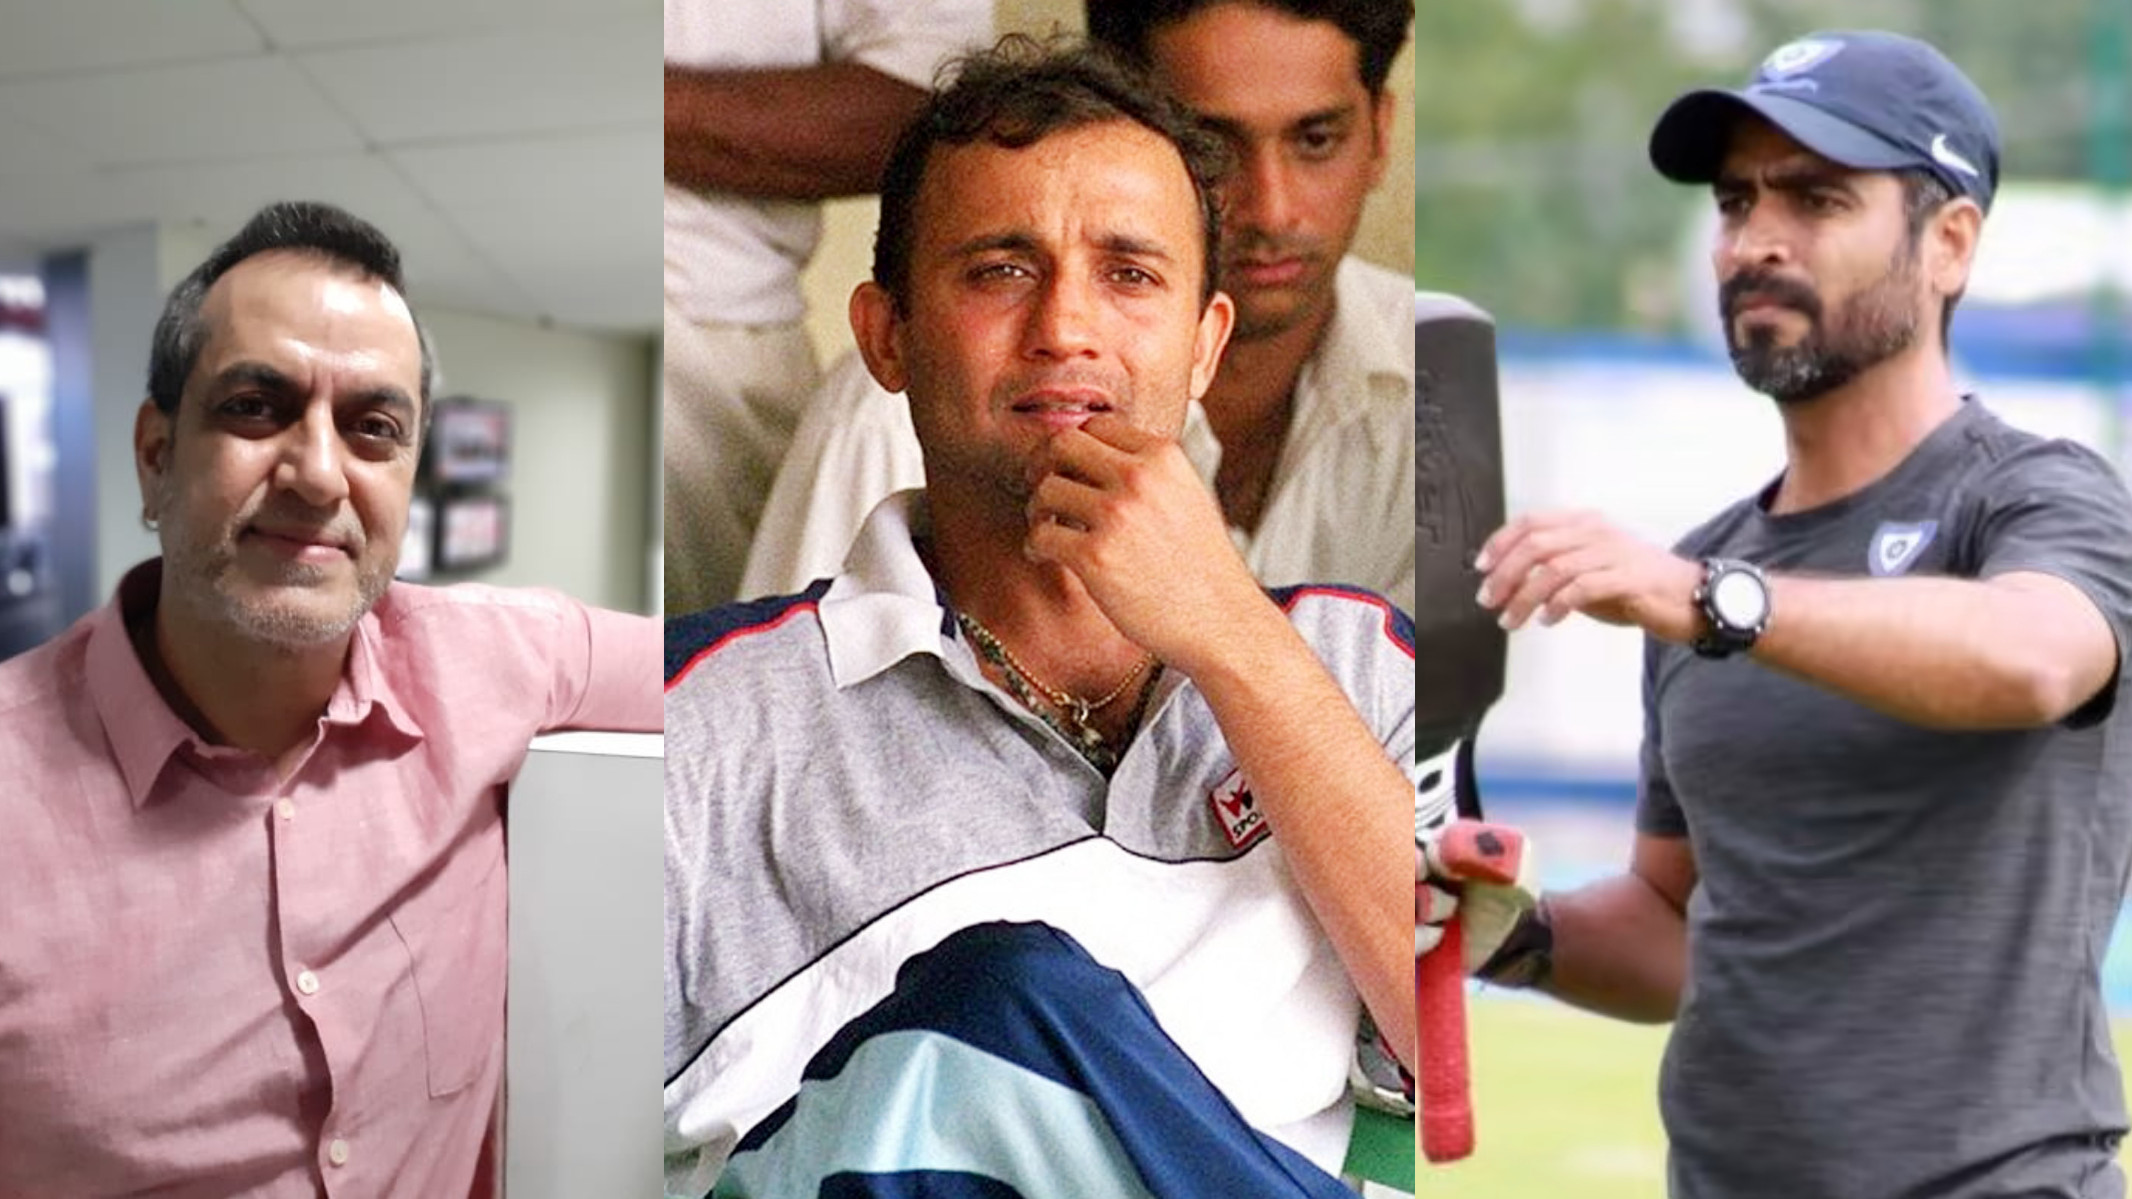 Nayan Mongia, Ajay Ratra, and Maninder Singh among applicants for India selectors post- Report